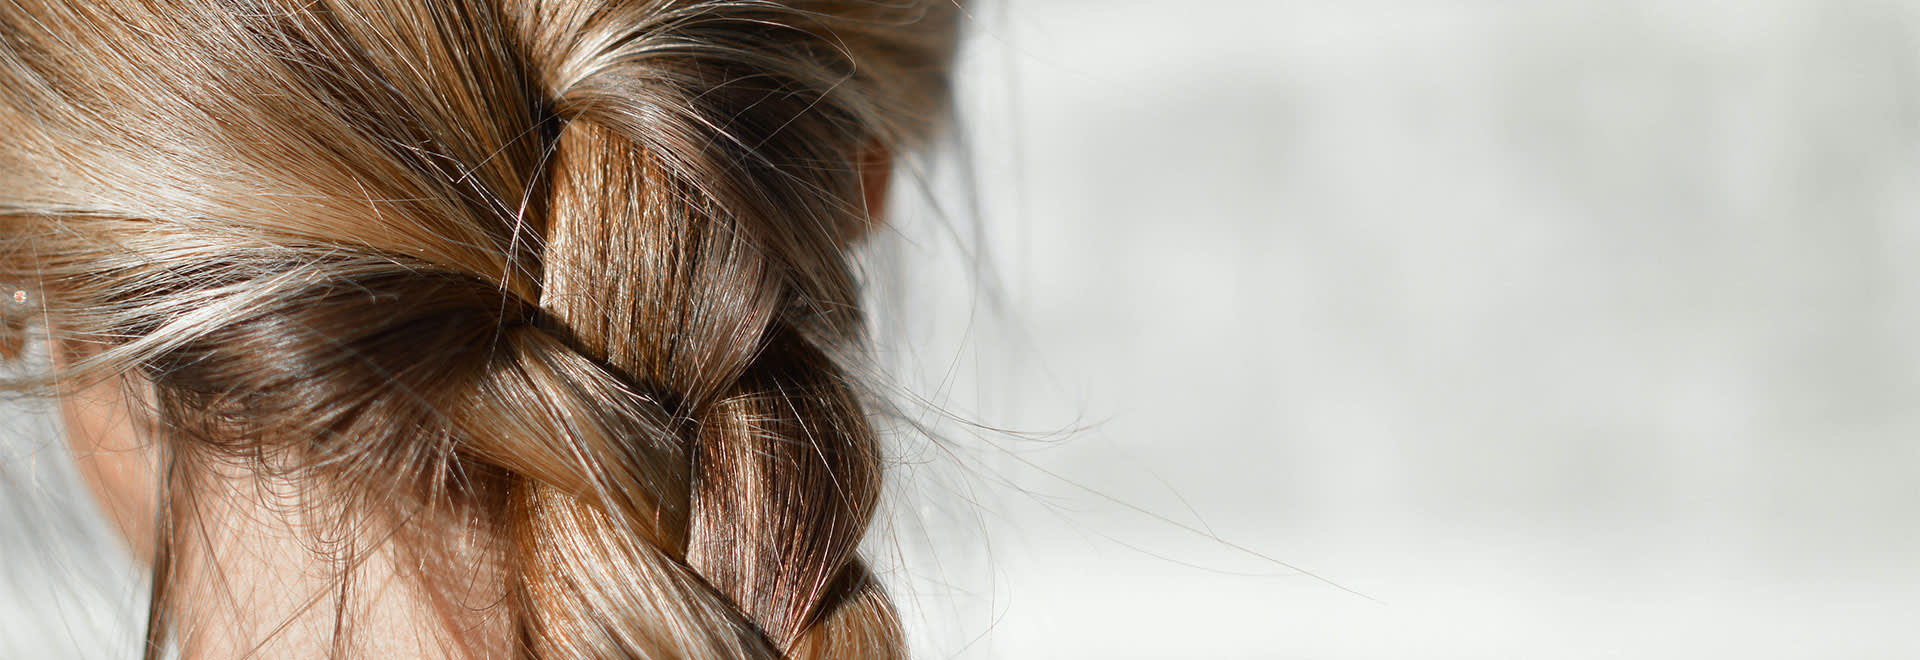 A close-up photo of braid in blonde hair